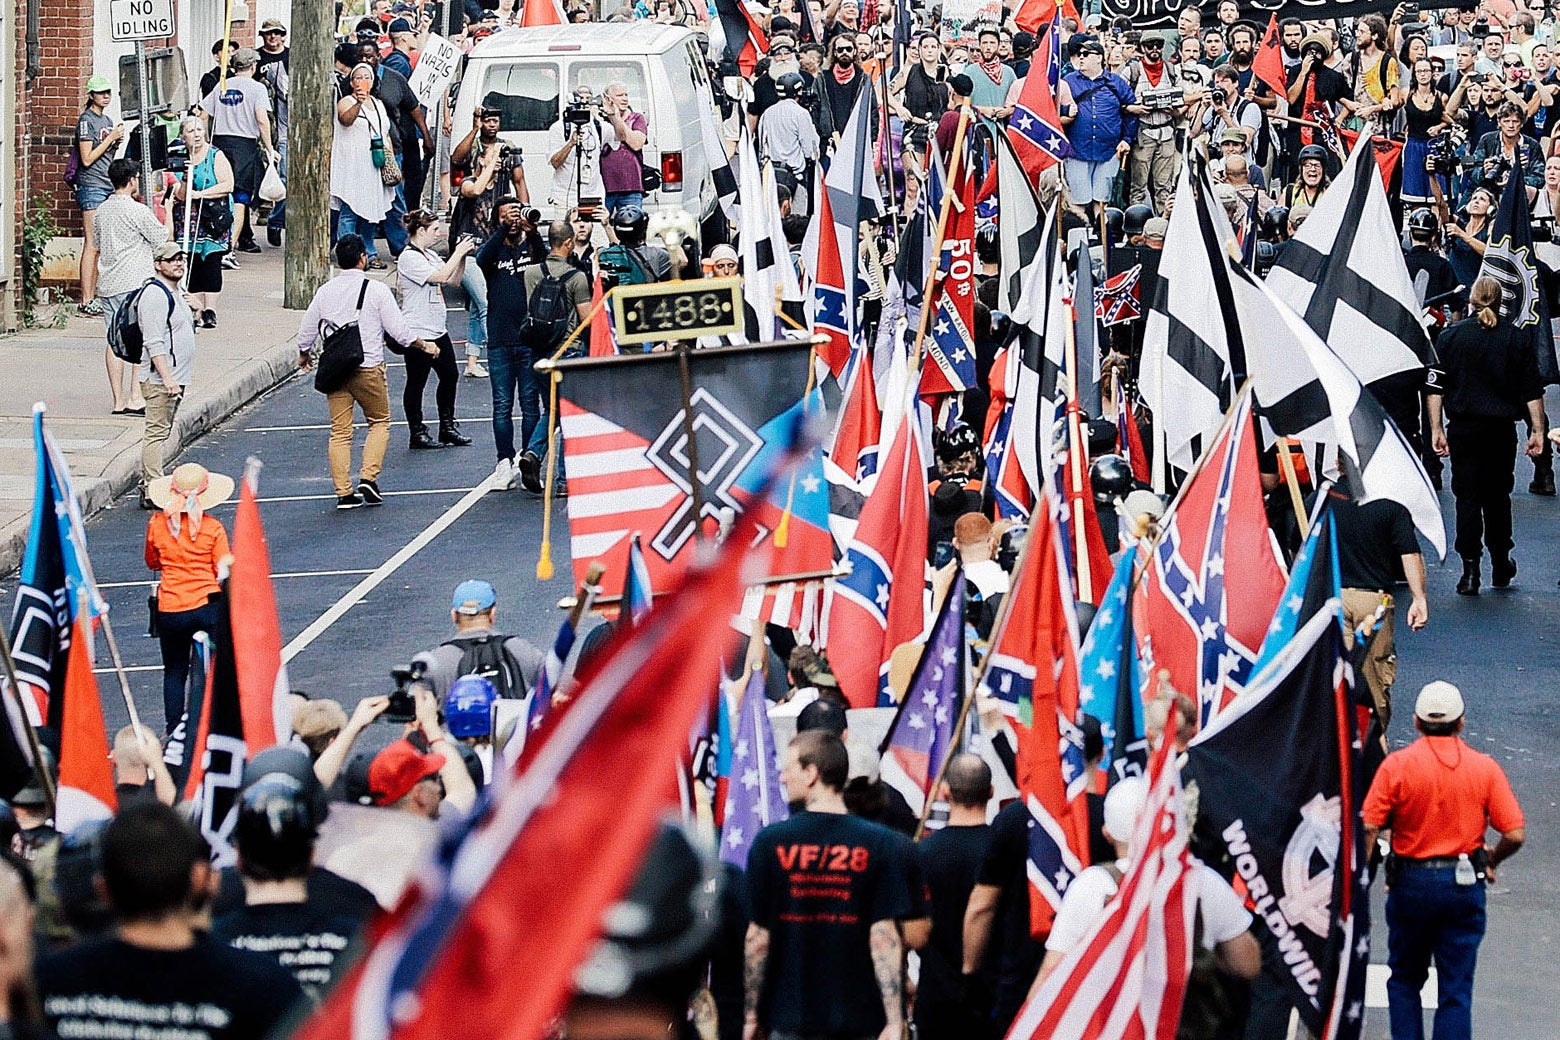 A group of white supremacists and other alt-right figures wave flags and march in Charlotesville.